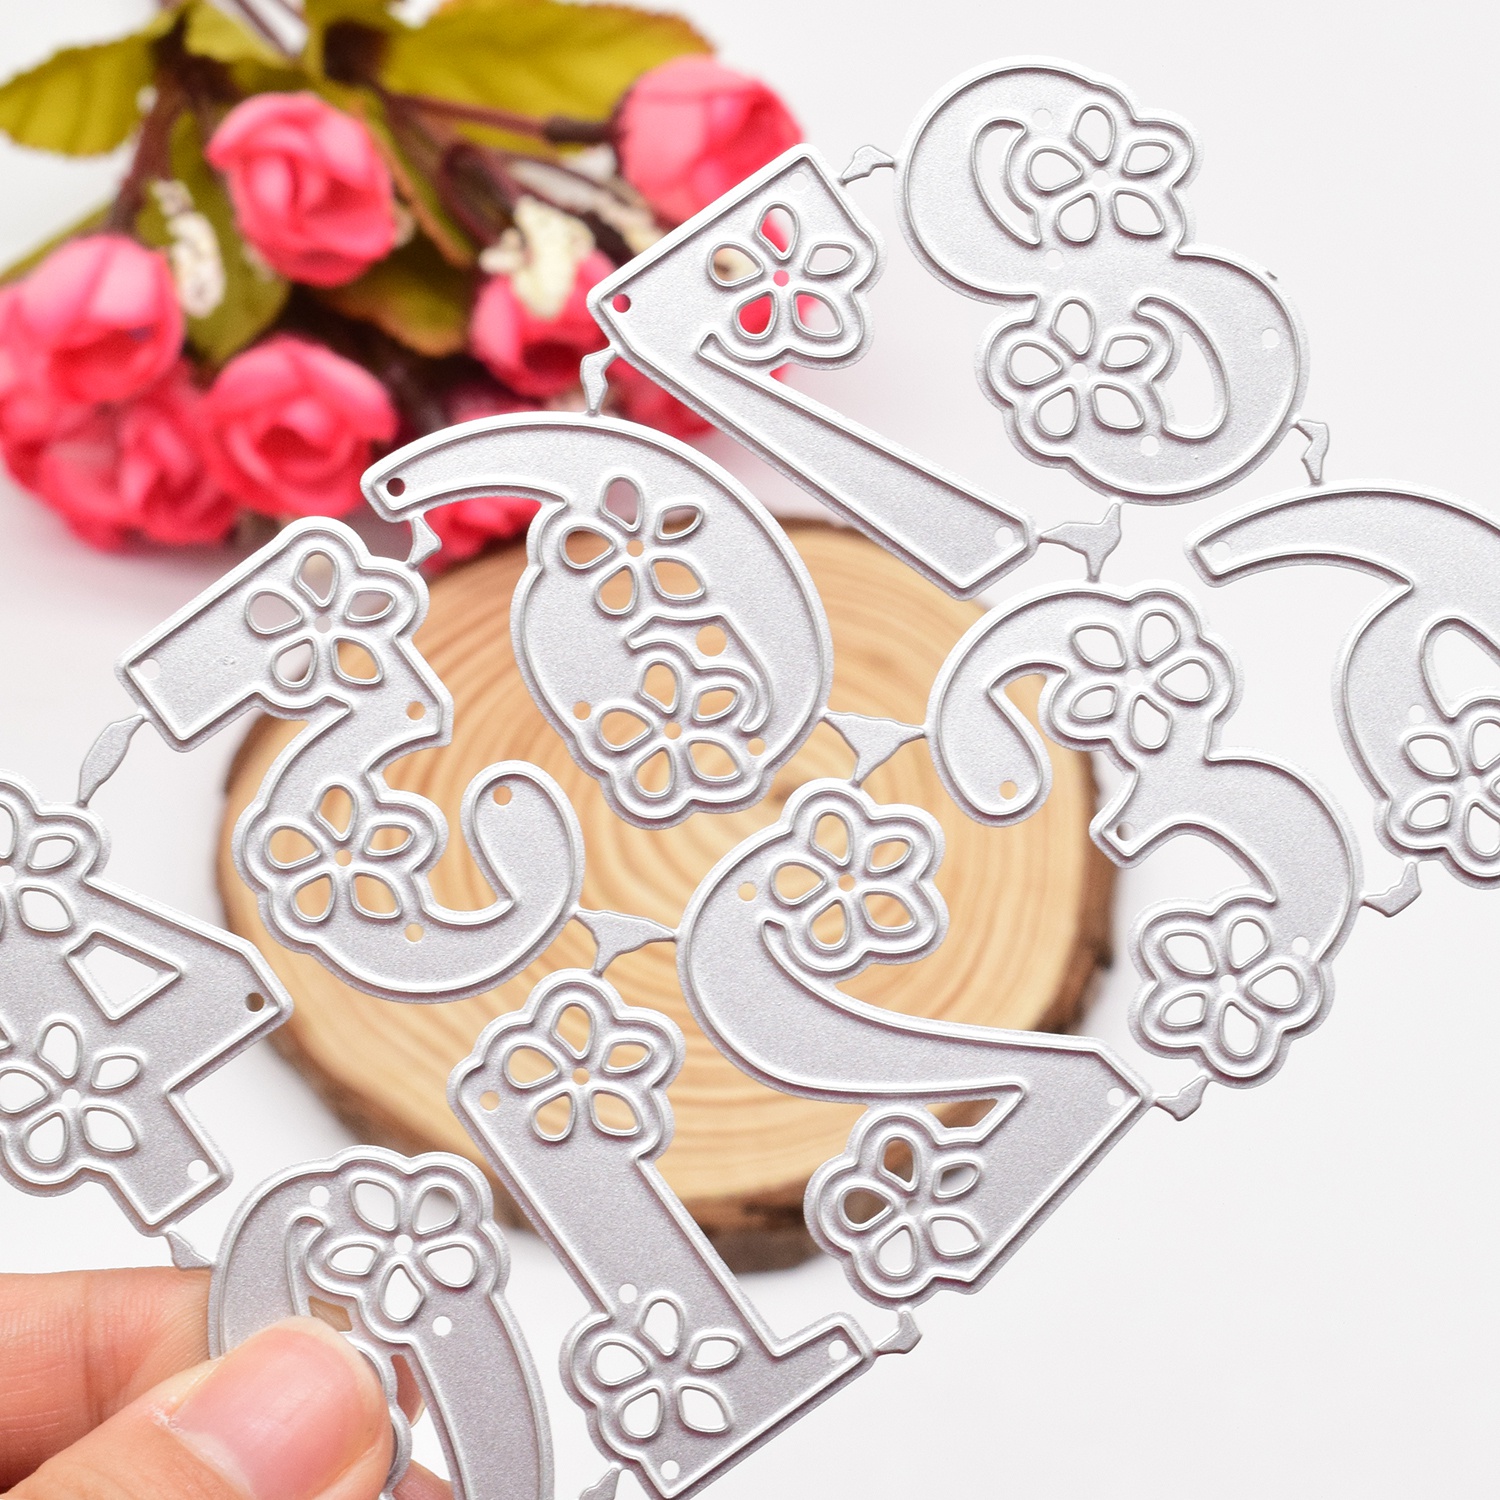 DTTBlue 25/50 Years Anniversary Metal Cutting Dies Branch Letter  Scrapbooking Making Cards Decorative Embossing DIY Crafts, Hand Tools -   Canada